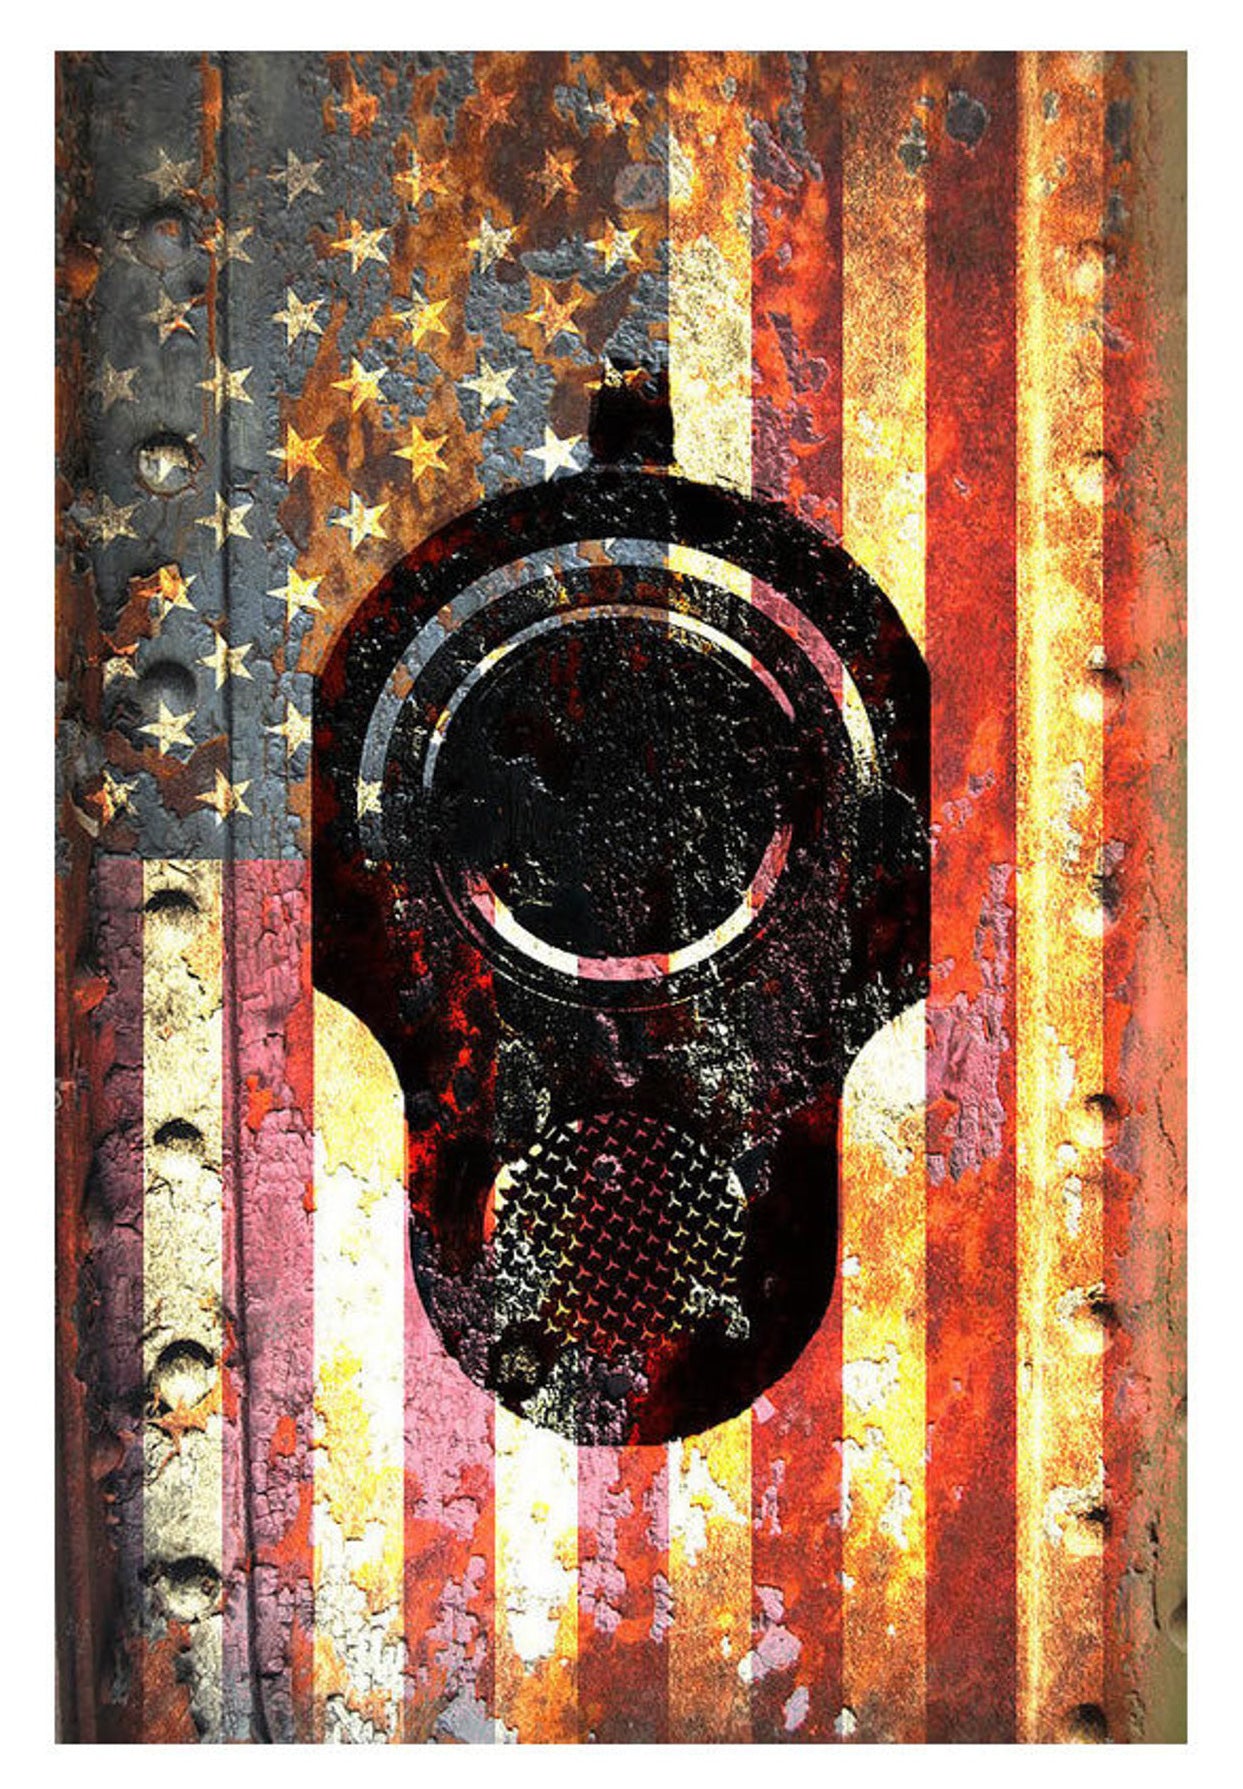 M1911 Colt Pistol 45 caliber Muzzle on Rusted American Flag Print Archival Paper